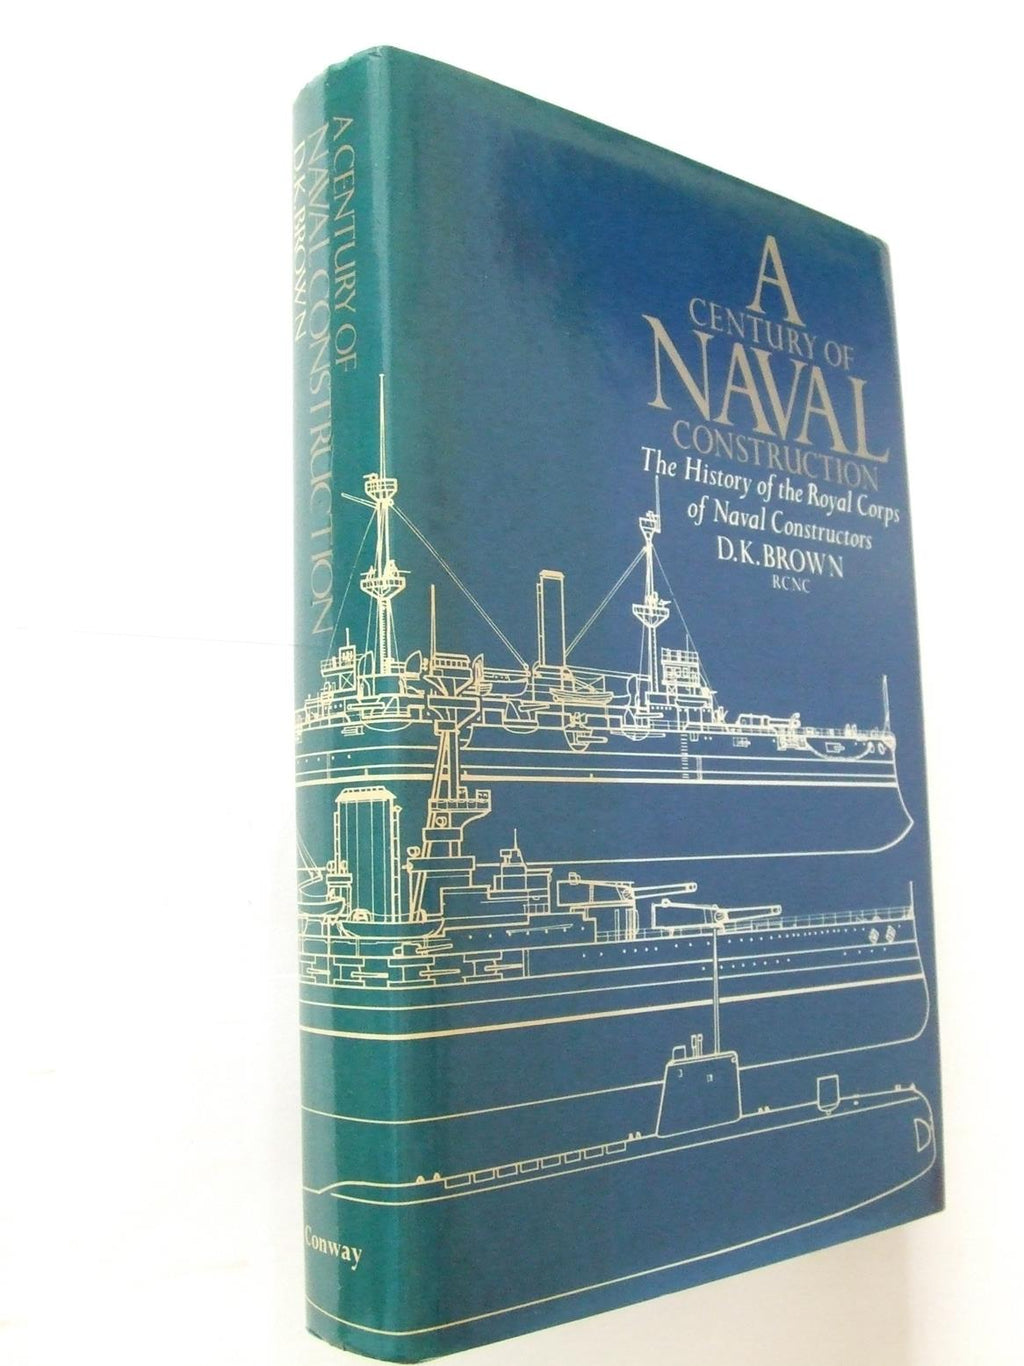 A Century of Naval Construction